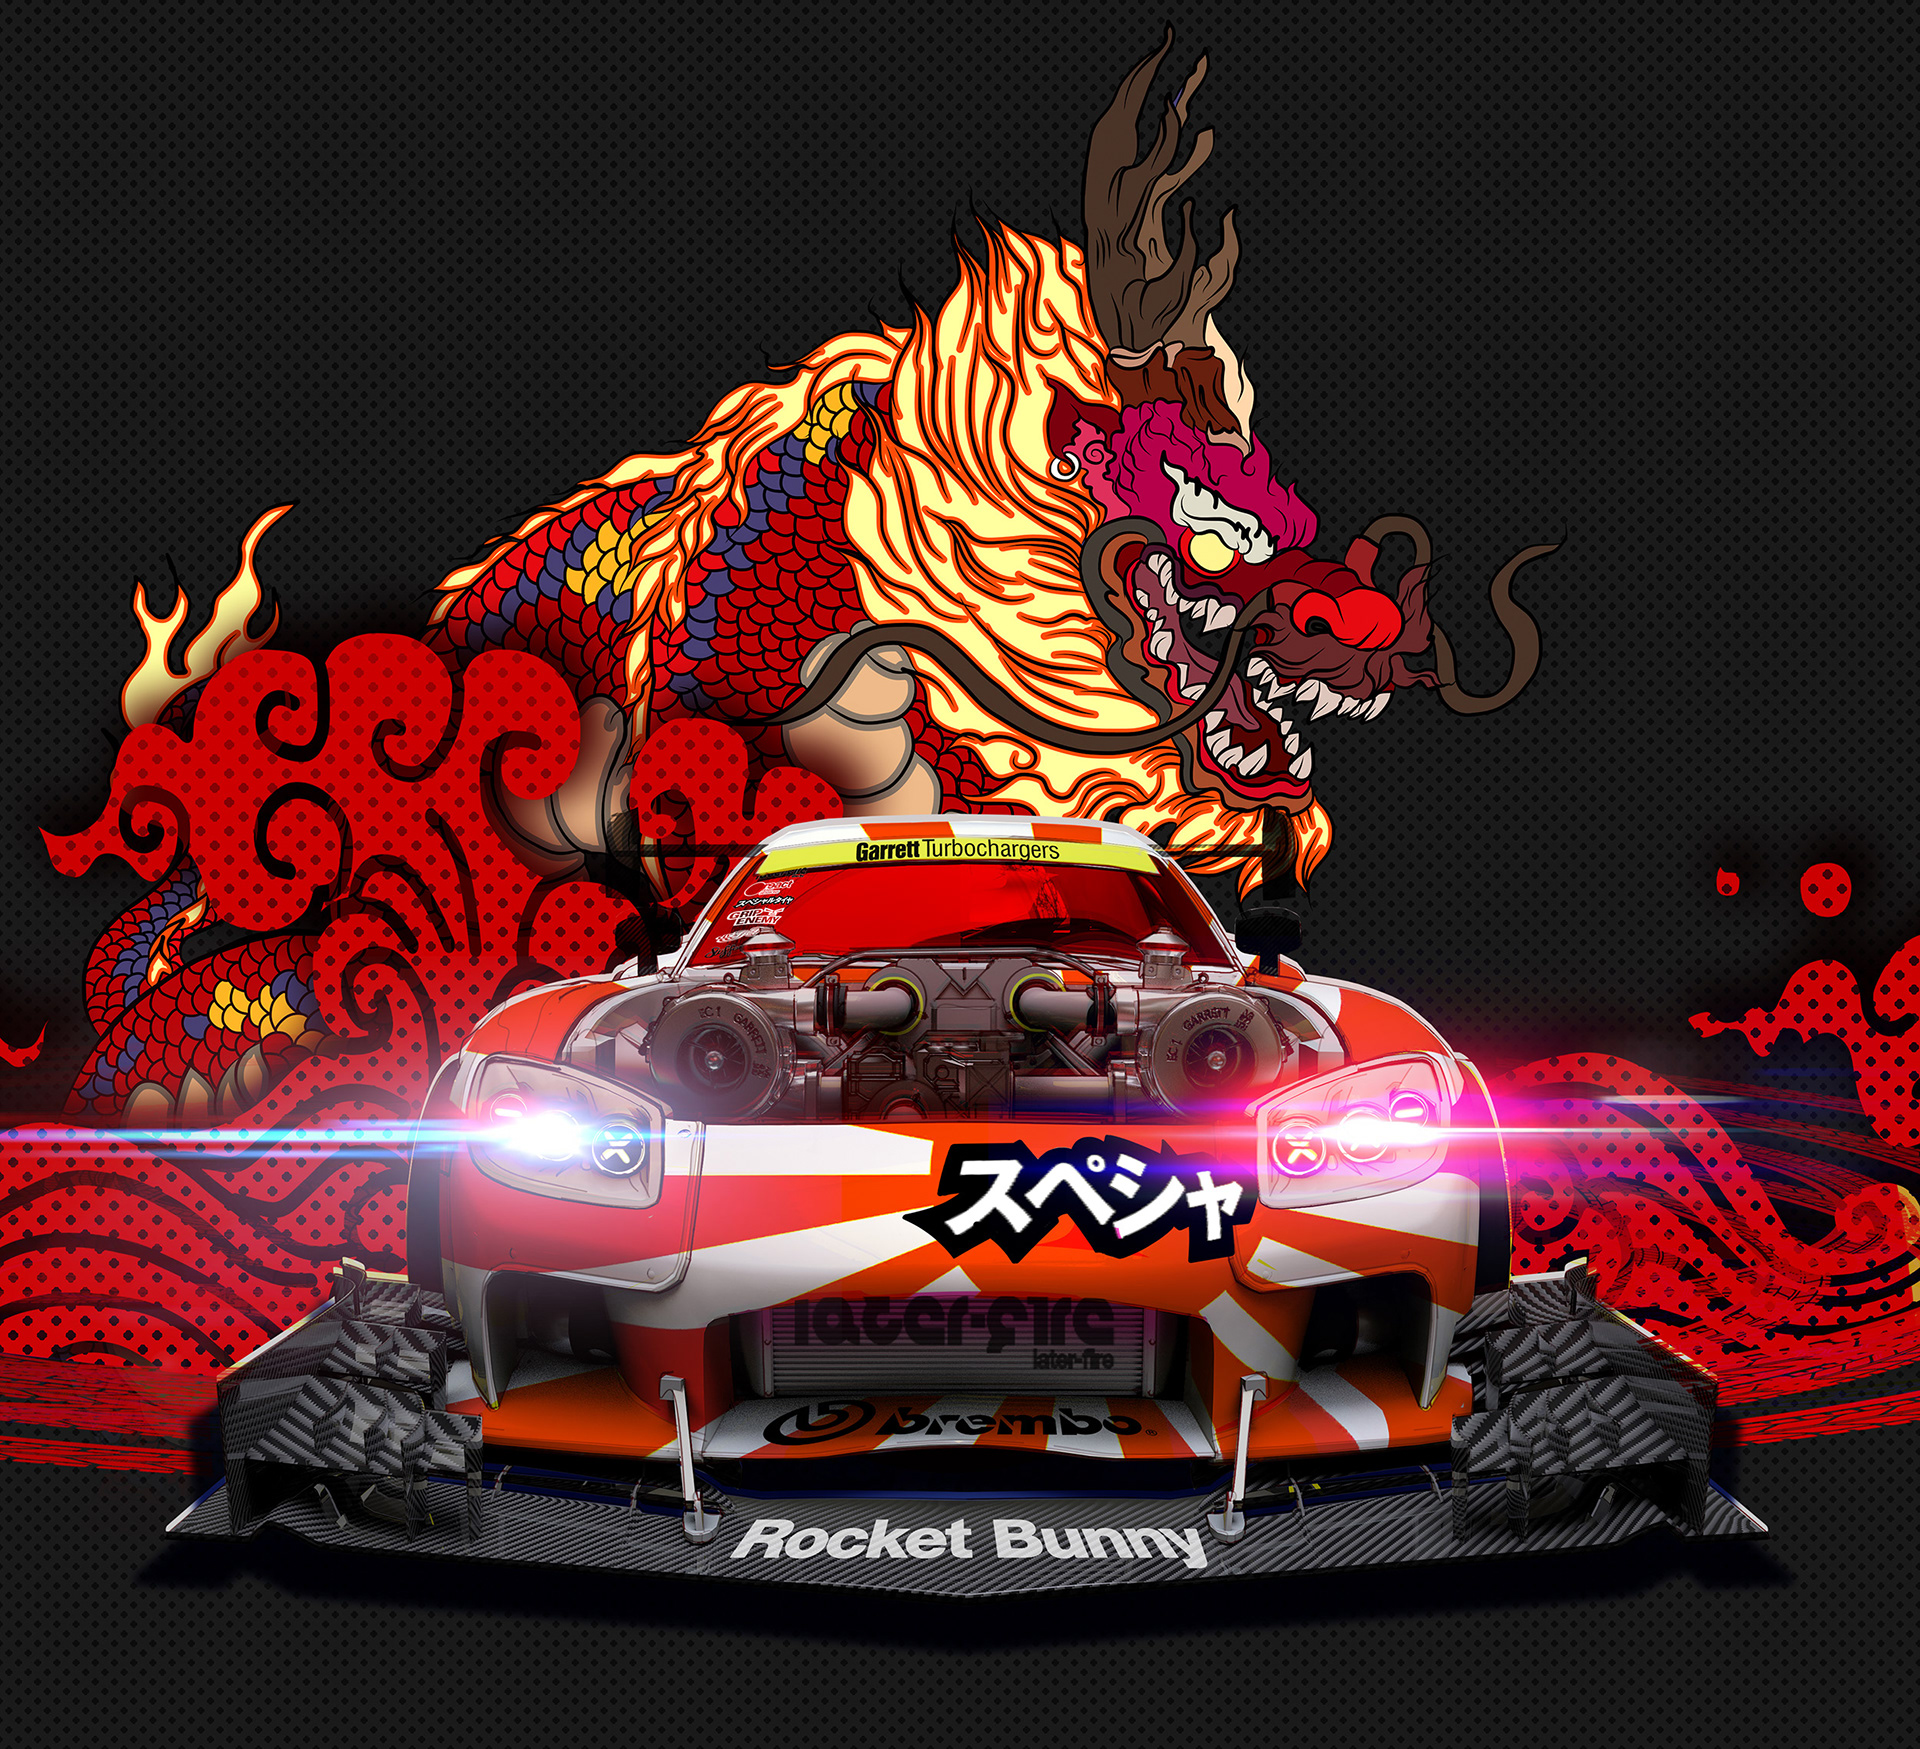 Dragons GANG! (RX-7) + FREE Gumroad Decals on Behance41fa4474947749.5c4908a98d439.jpg